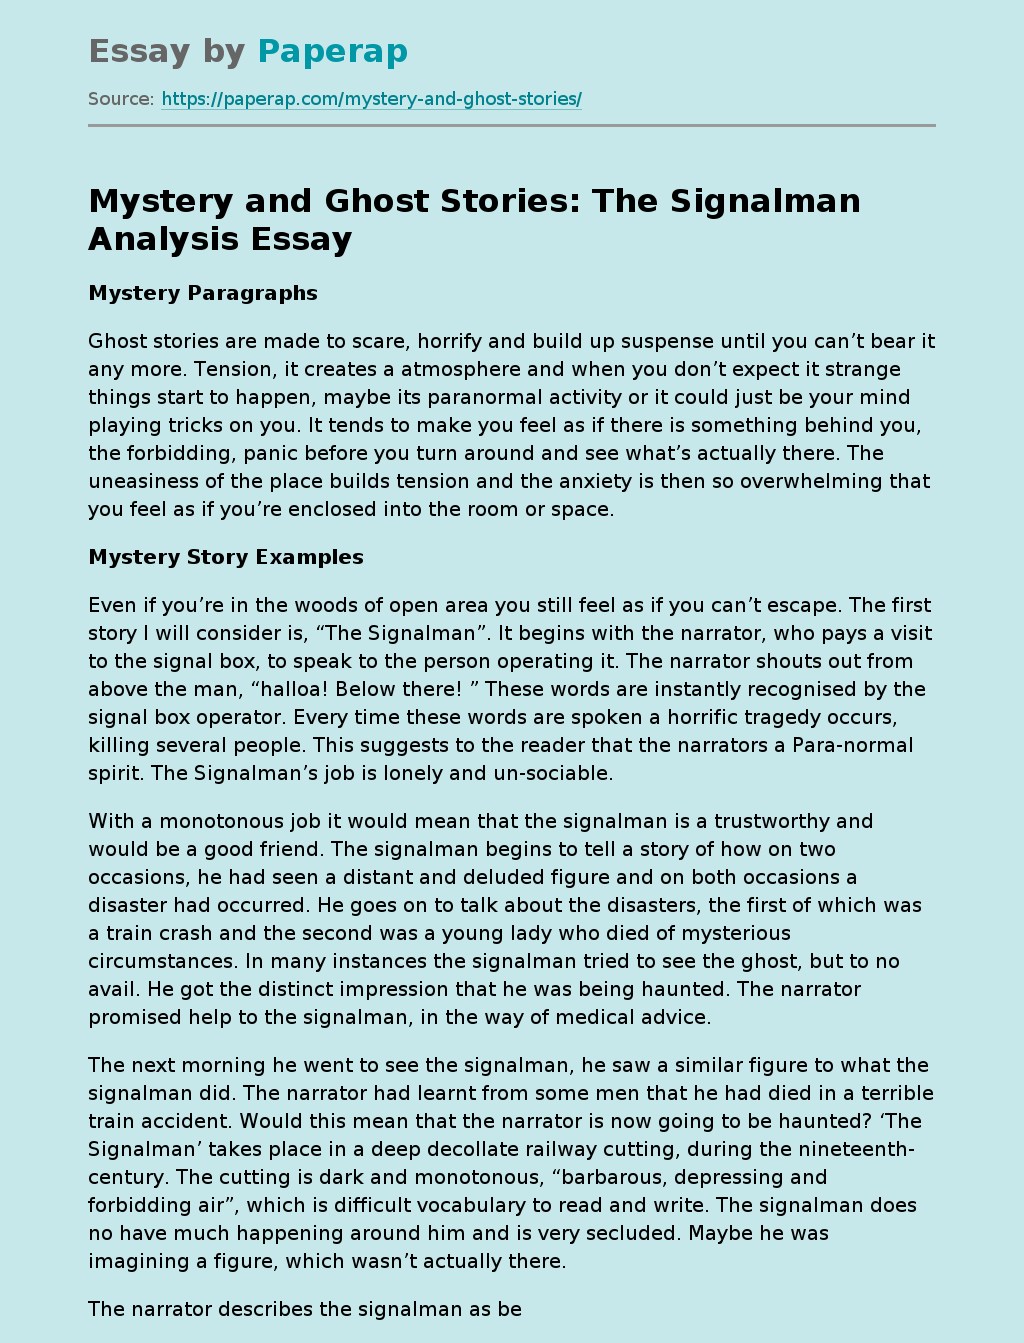 Mystery and Ghost Stories: The Signalman Analysis